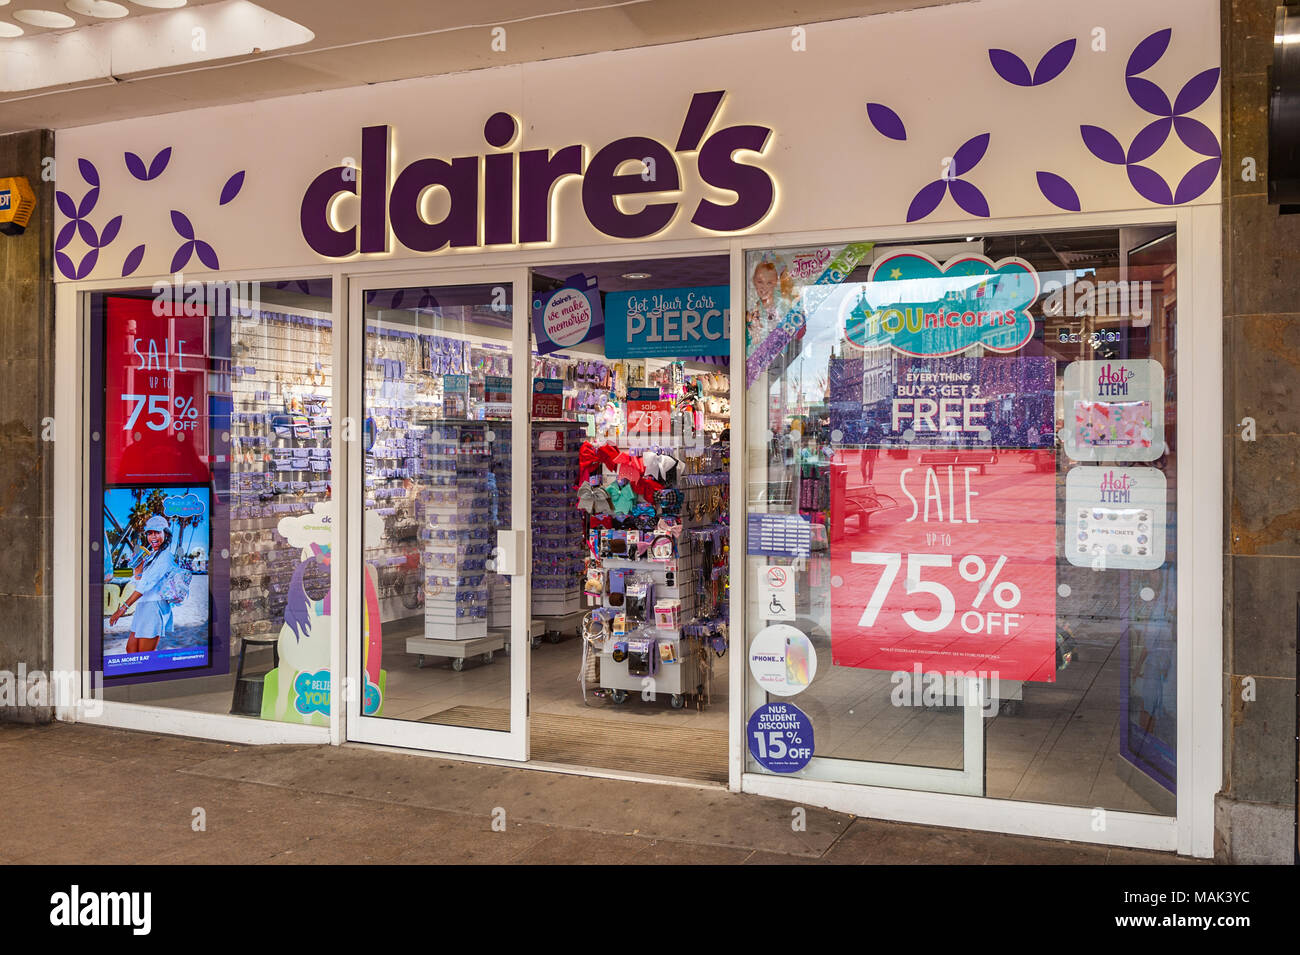 Claire's accessory shop in Broadgate, Coventry, West Midlands, UK. Stock Photo